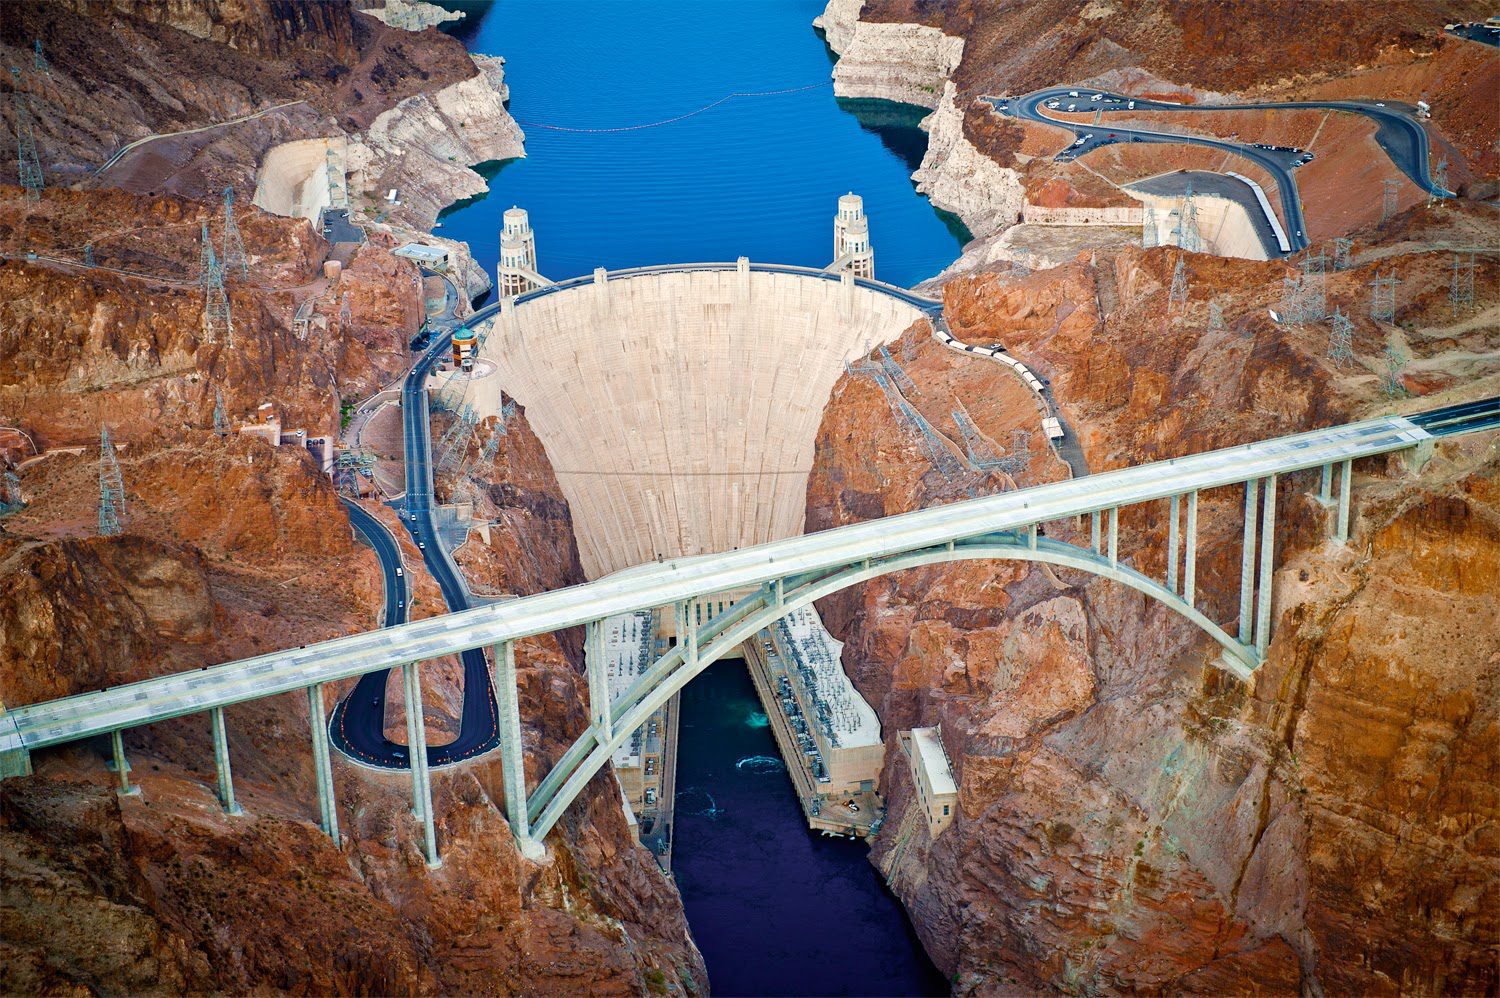 What To Do at The Hoover Dam? Here are The Best 10 Things To Do